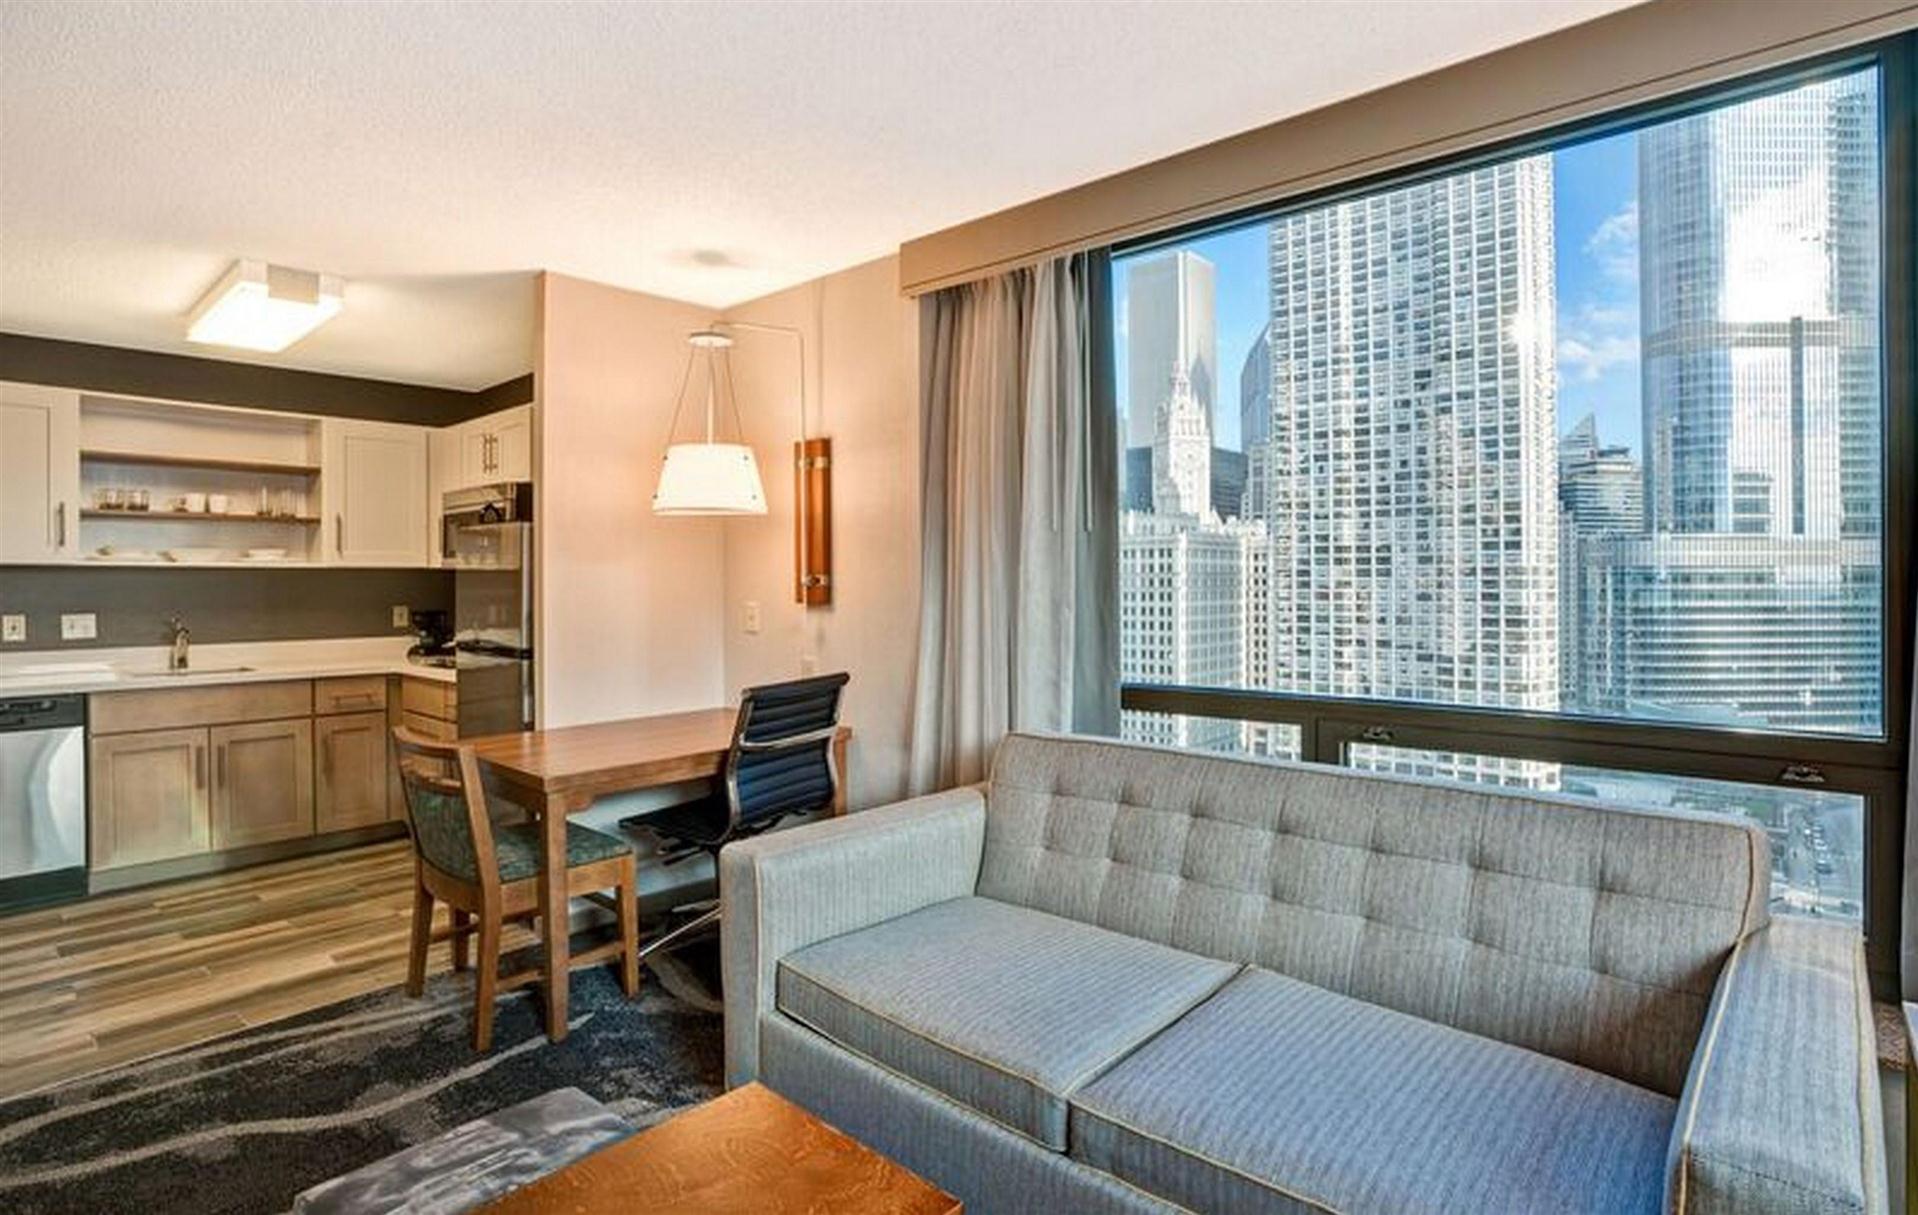 Homewood Suites by Hilton Chicago-Downtown in Chicago, IL